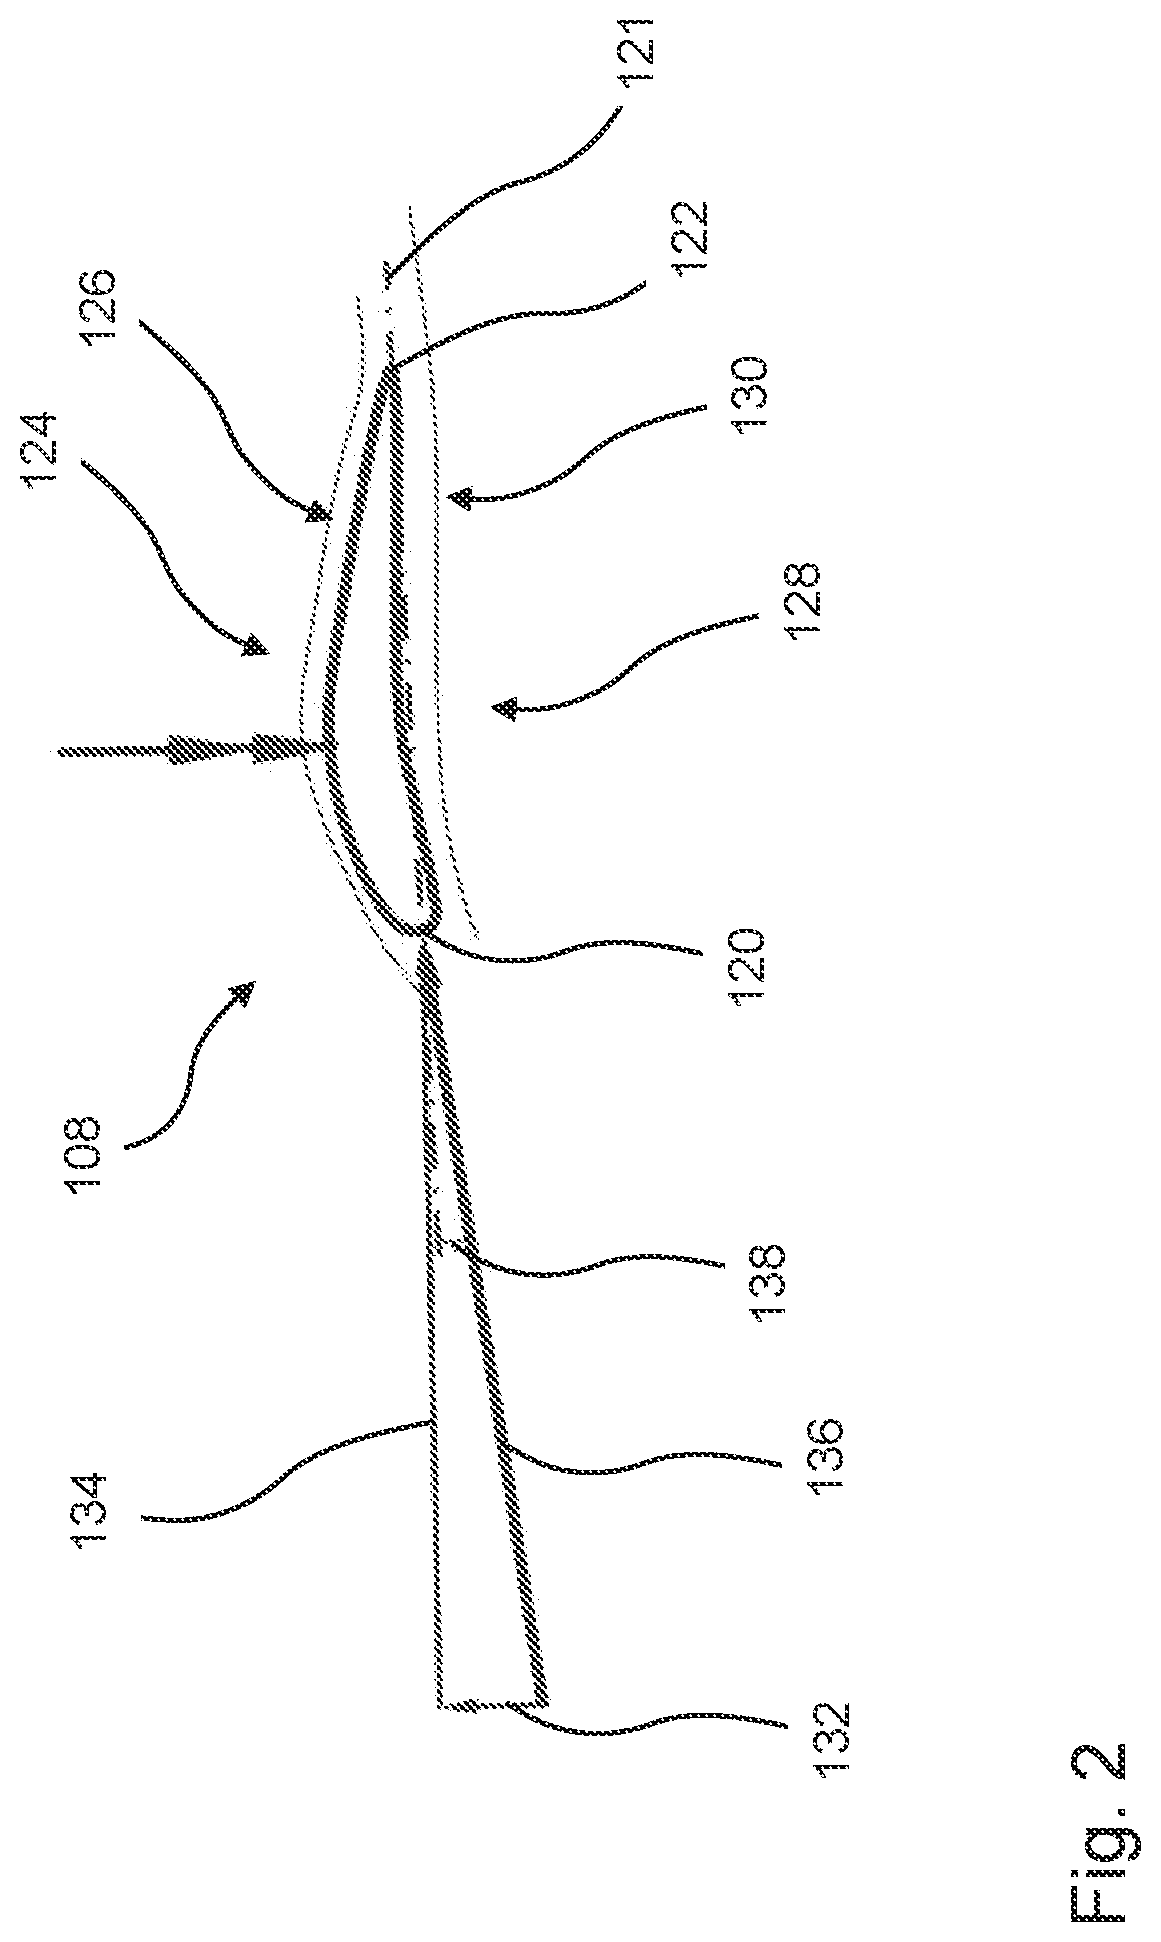 Method for setting a pitch angle of a rotor blade, control device for setting a pitch angle, and associated wind turbine